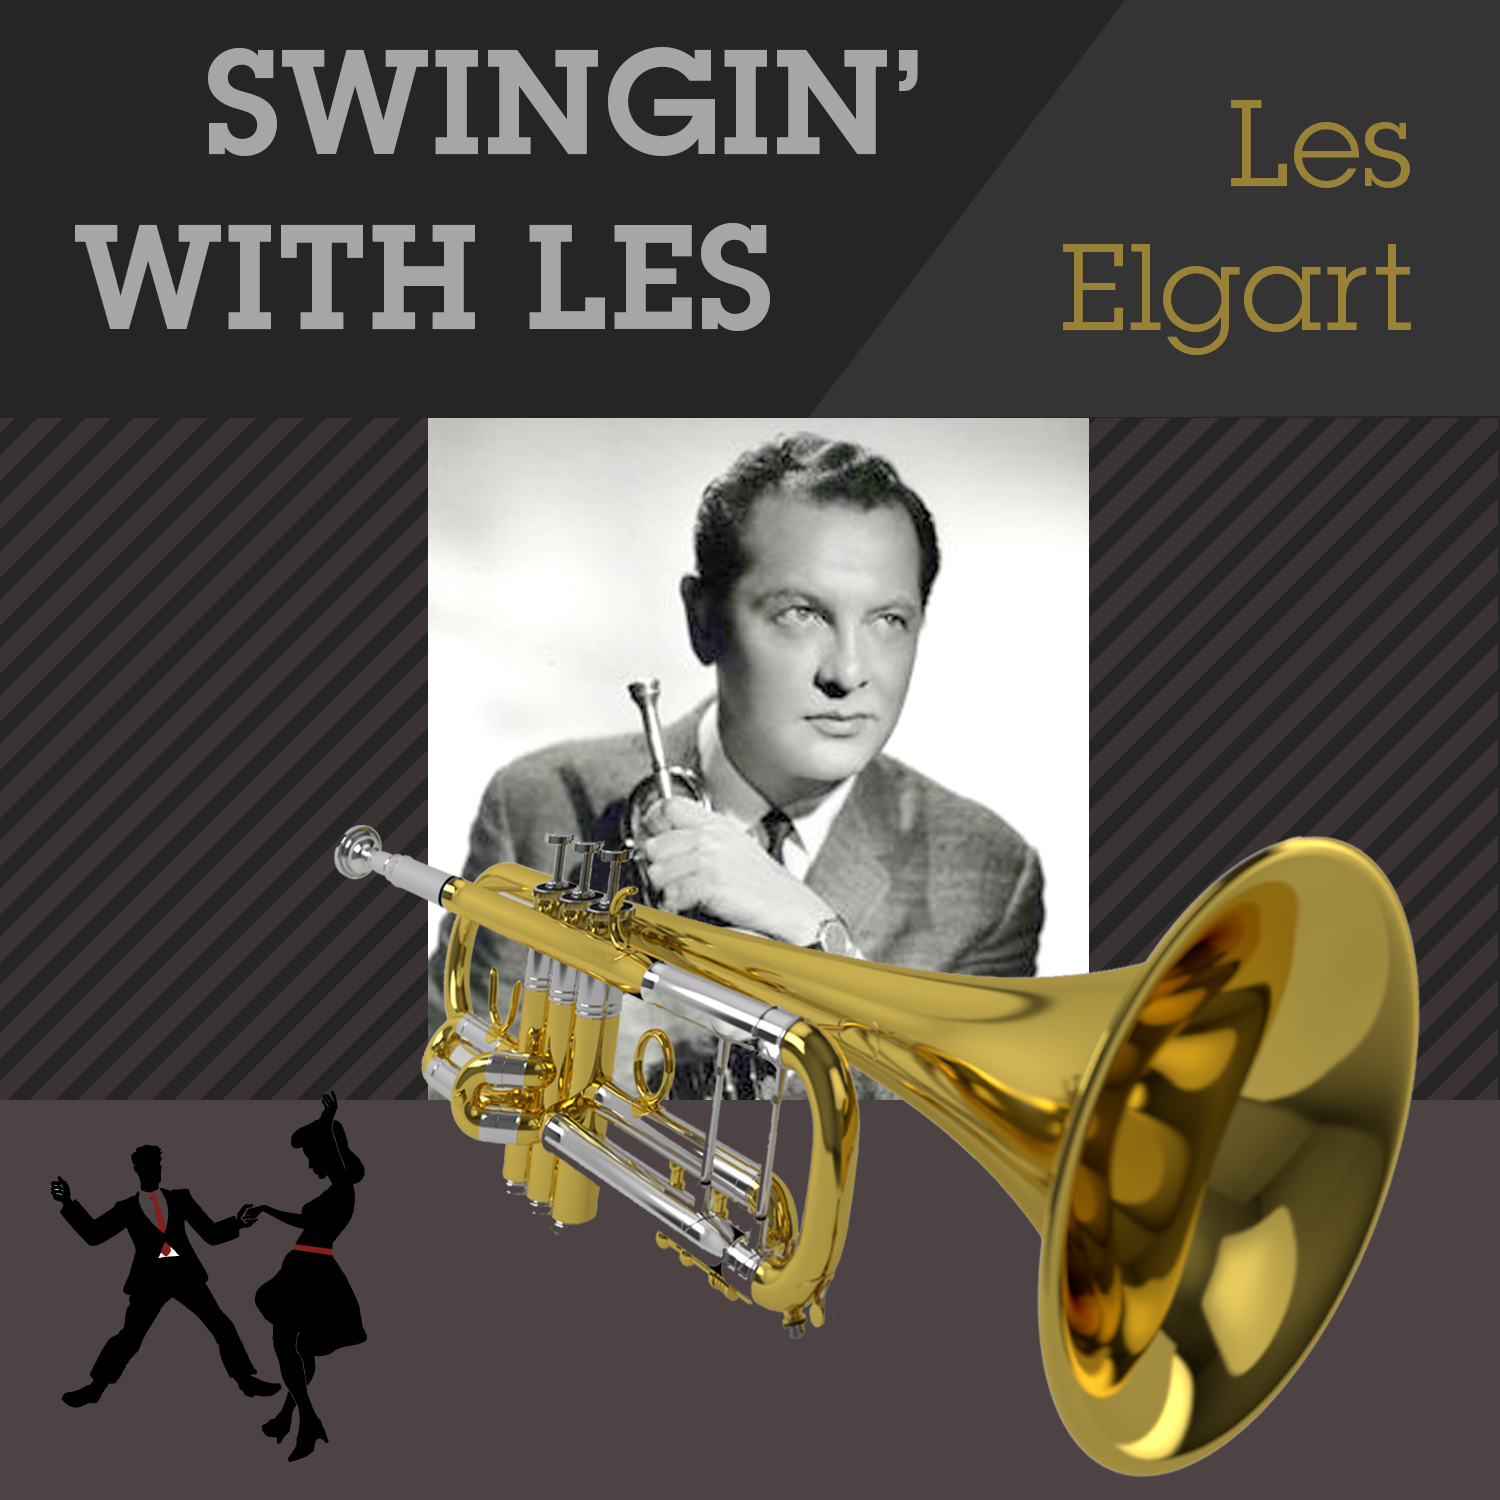 Swingin' With Les by Les Elgart